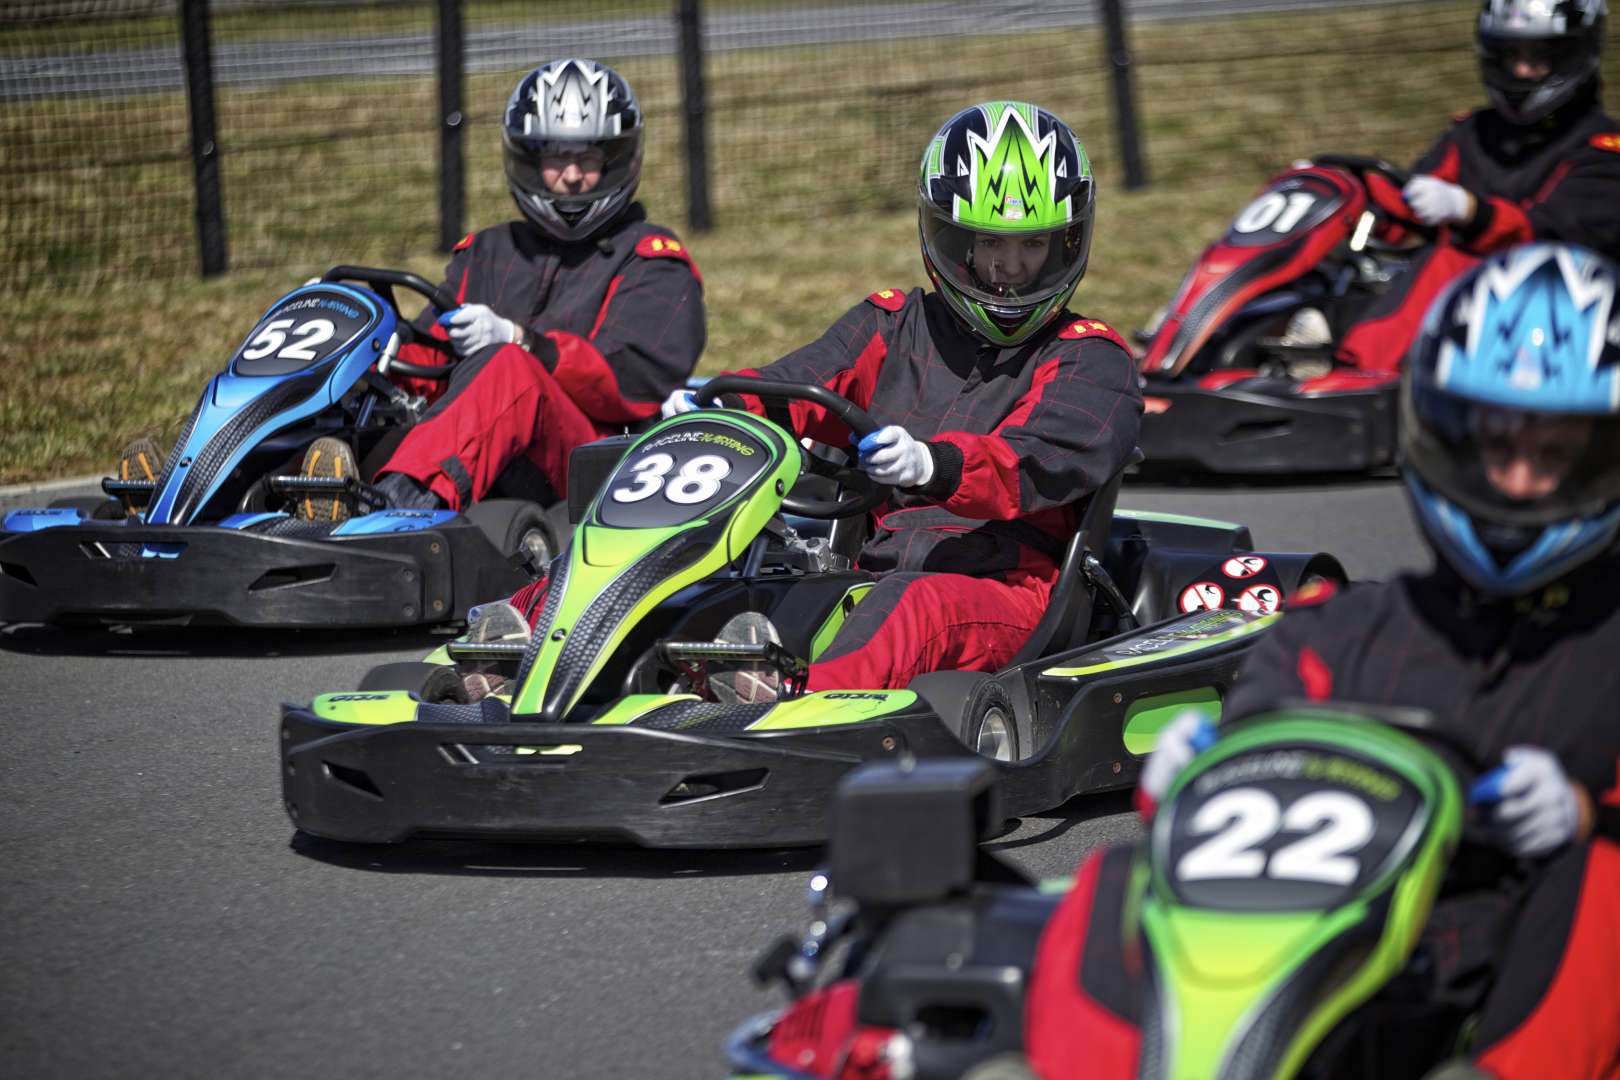 high-performance go-karts for an exhilarating experience!